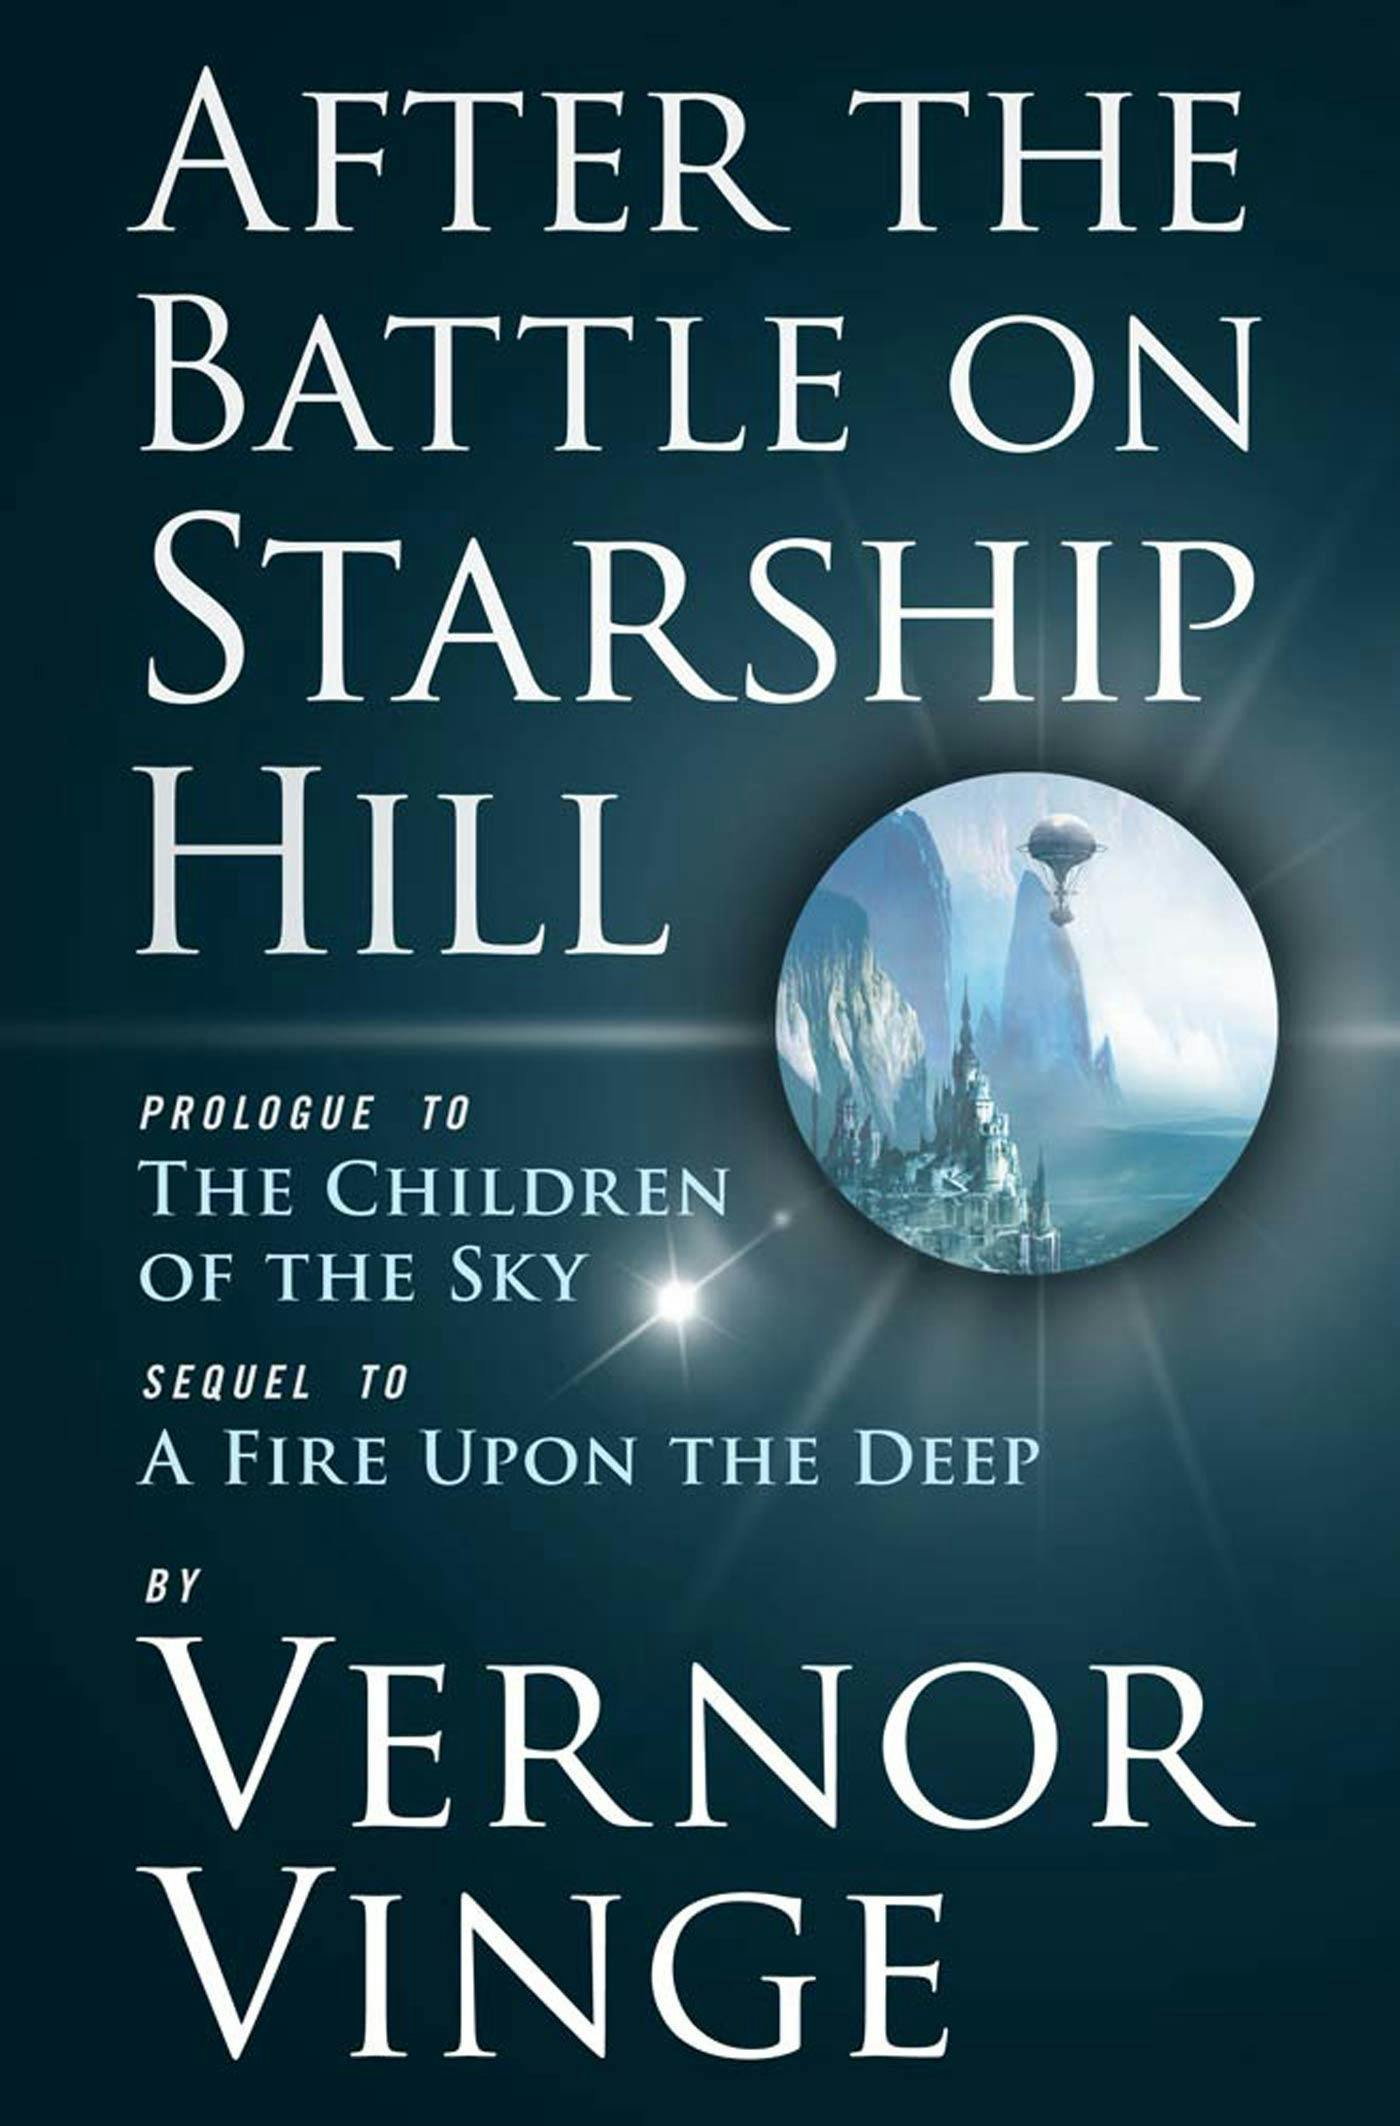 The Children of the Sky by Vernor Vinge - Audiobooks on Google Play